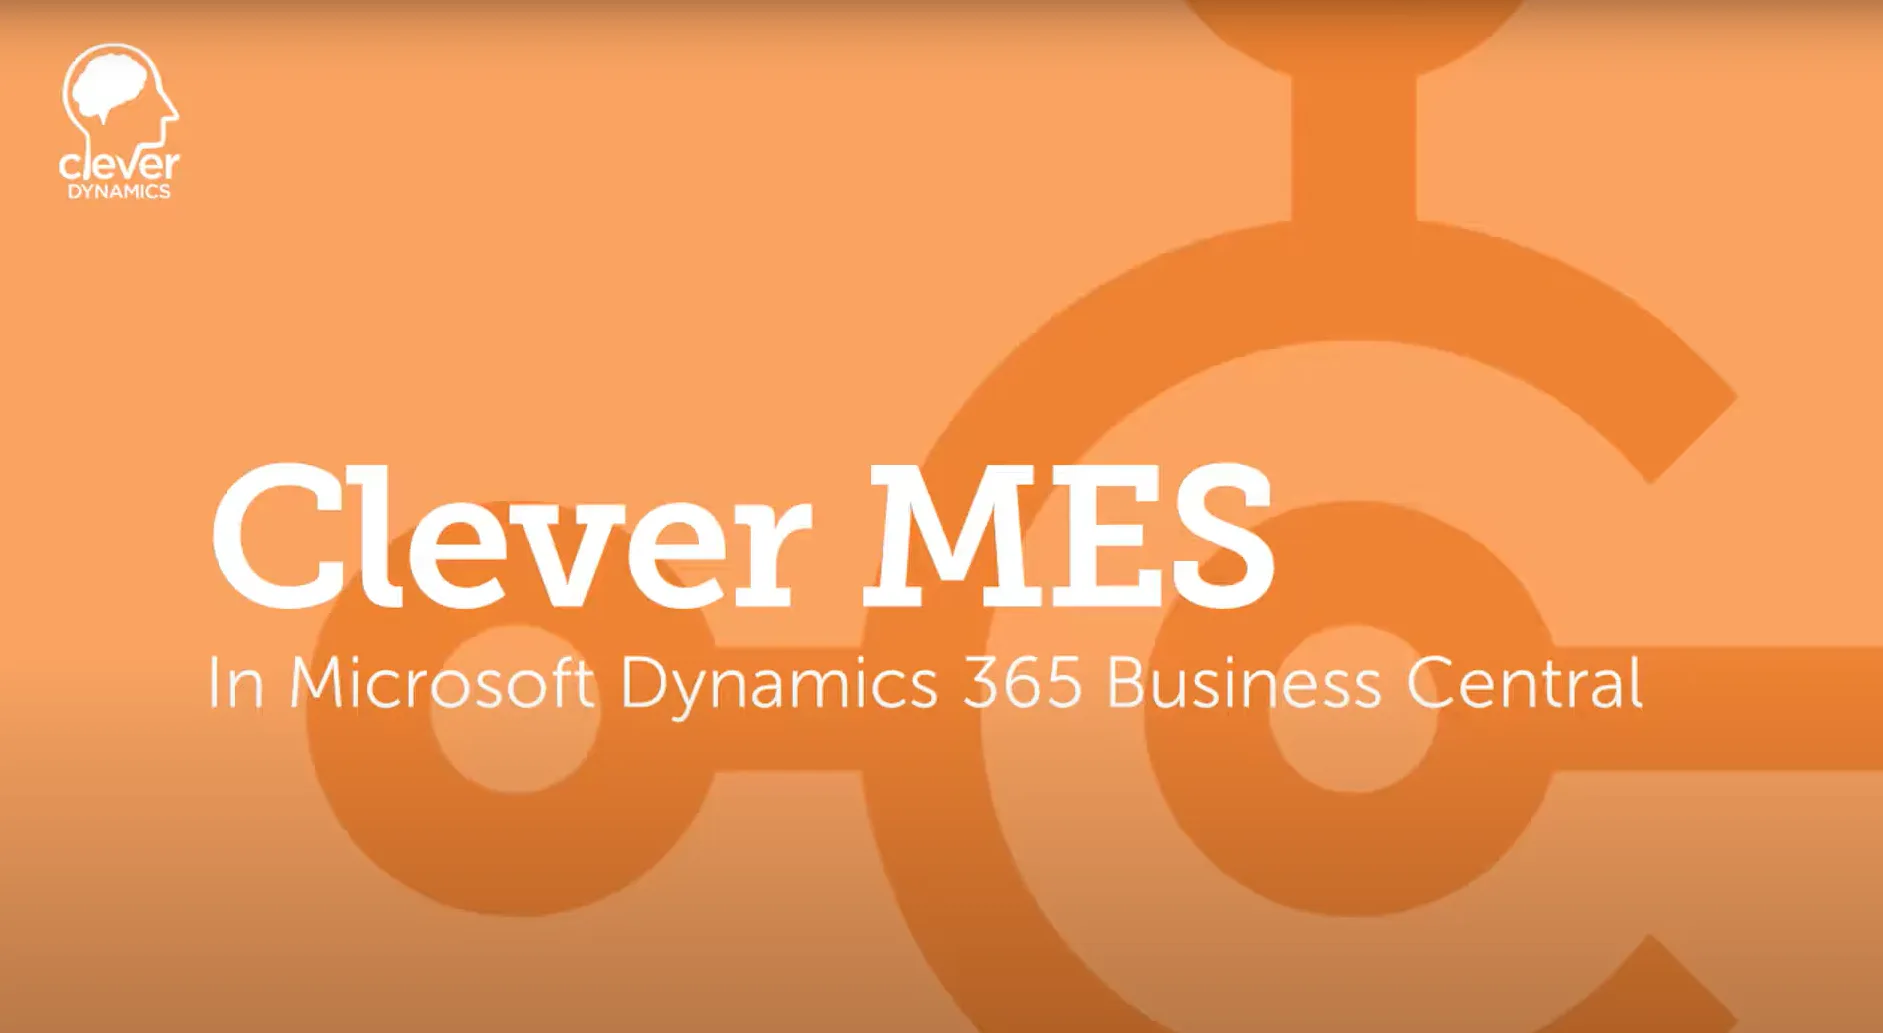 Clever MES by Clever Dynamics for Dynamics 365